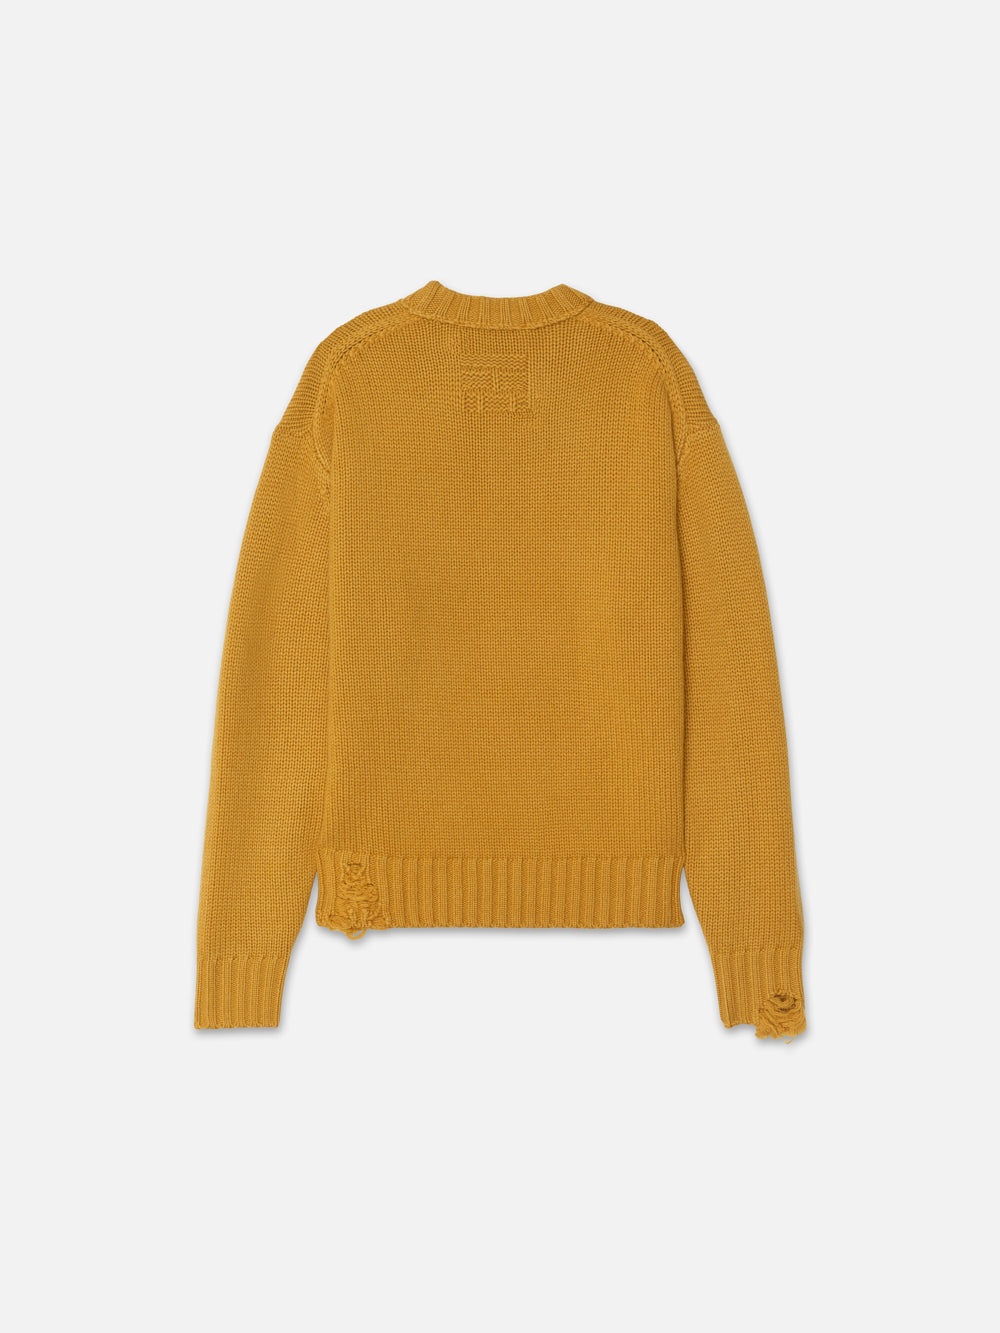 Destroyed Cashmere Sweater in Yellow - 3